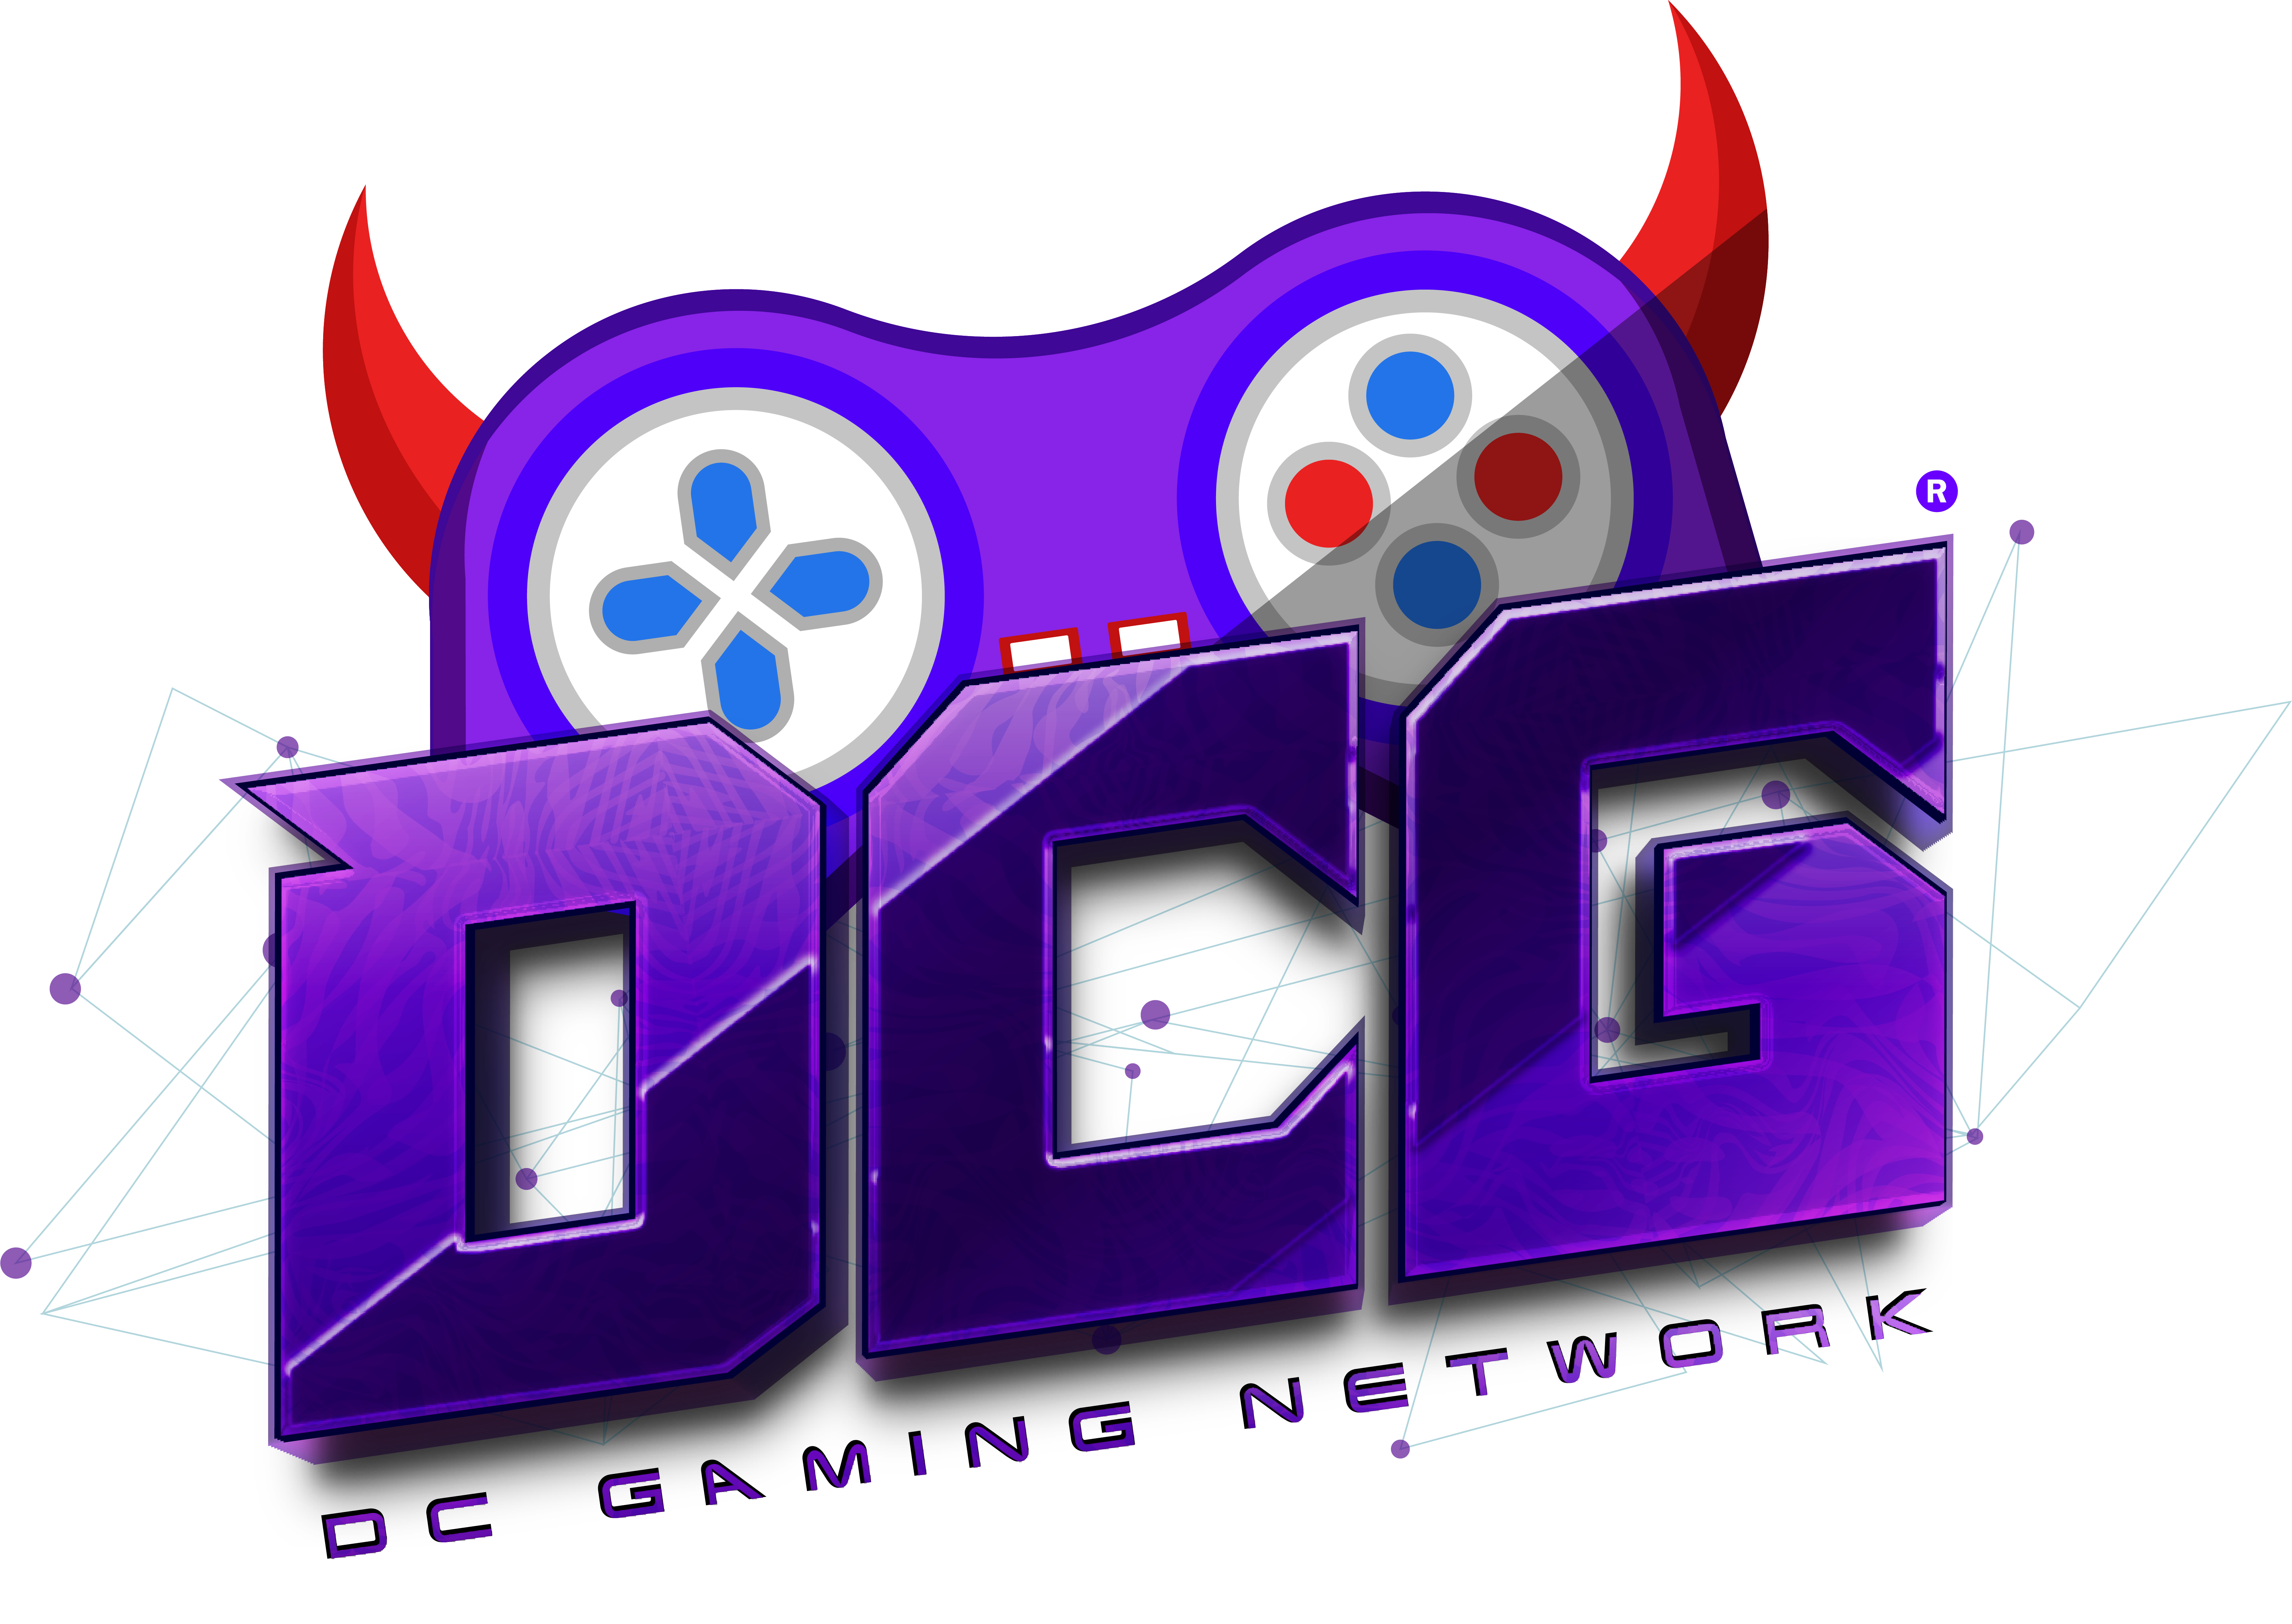 DCGAMING NETWORK